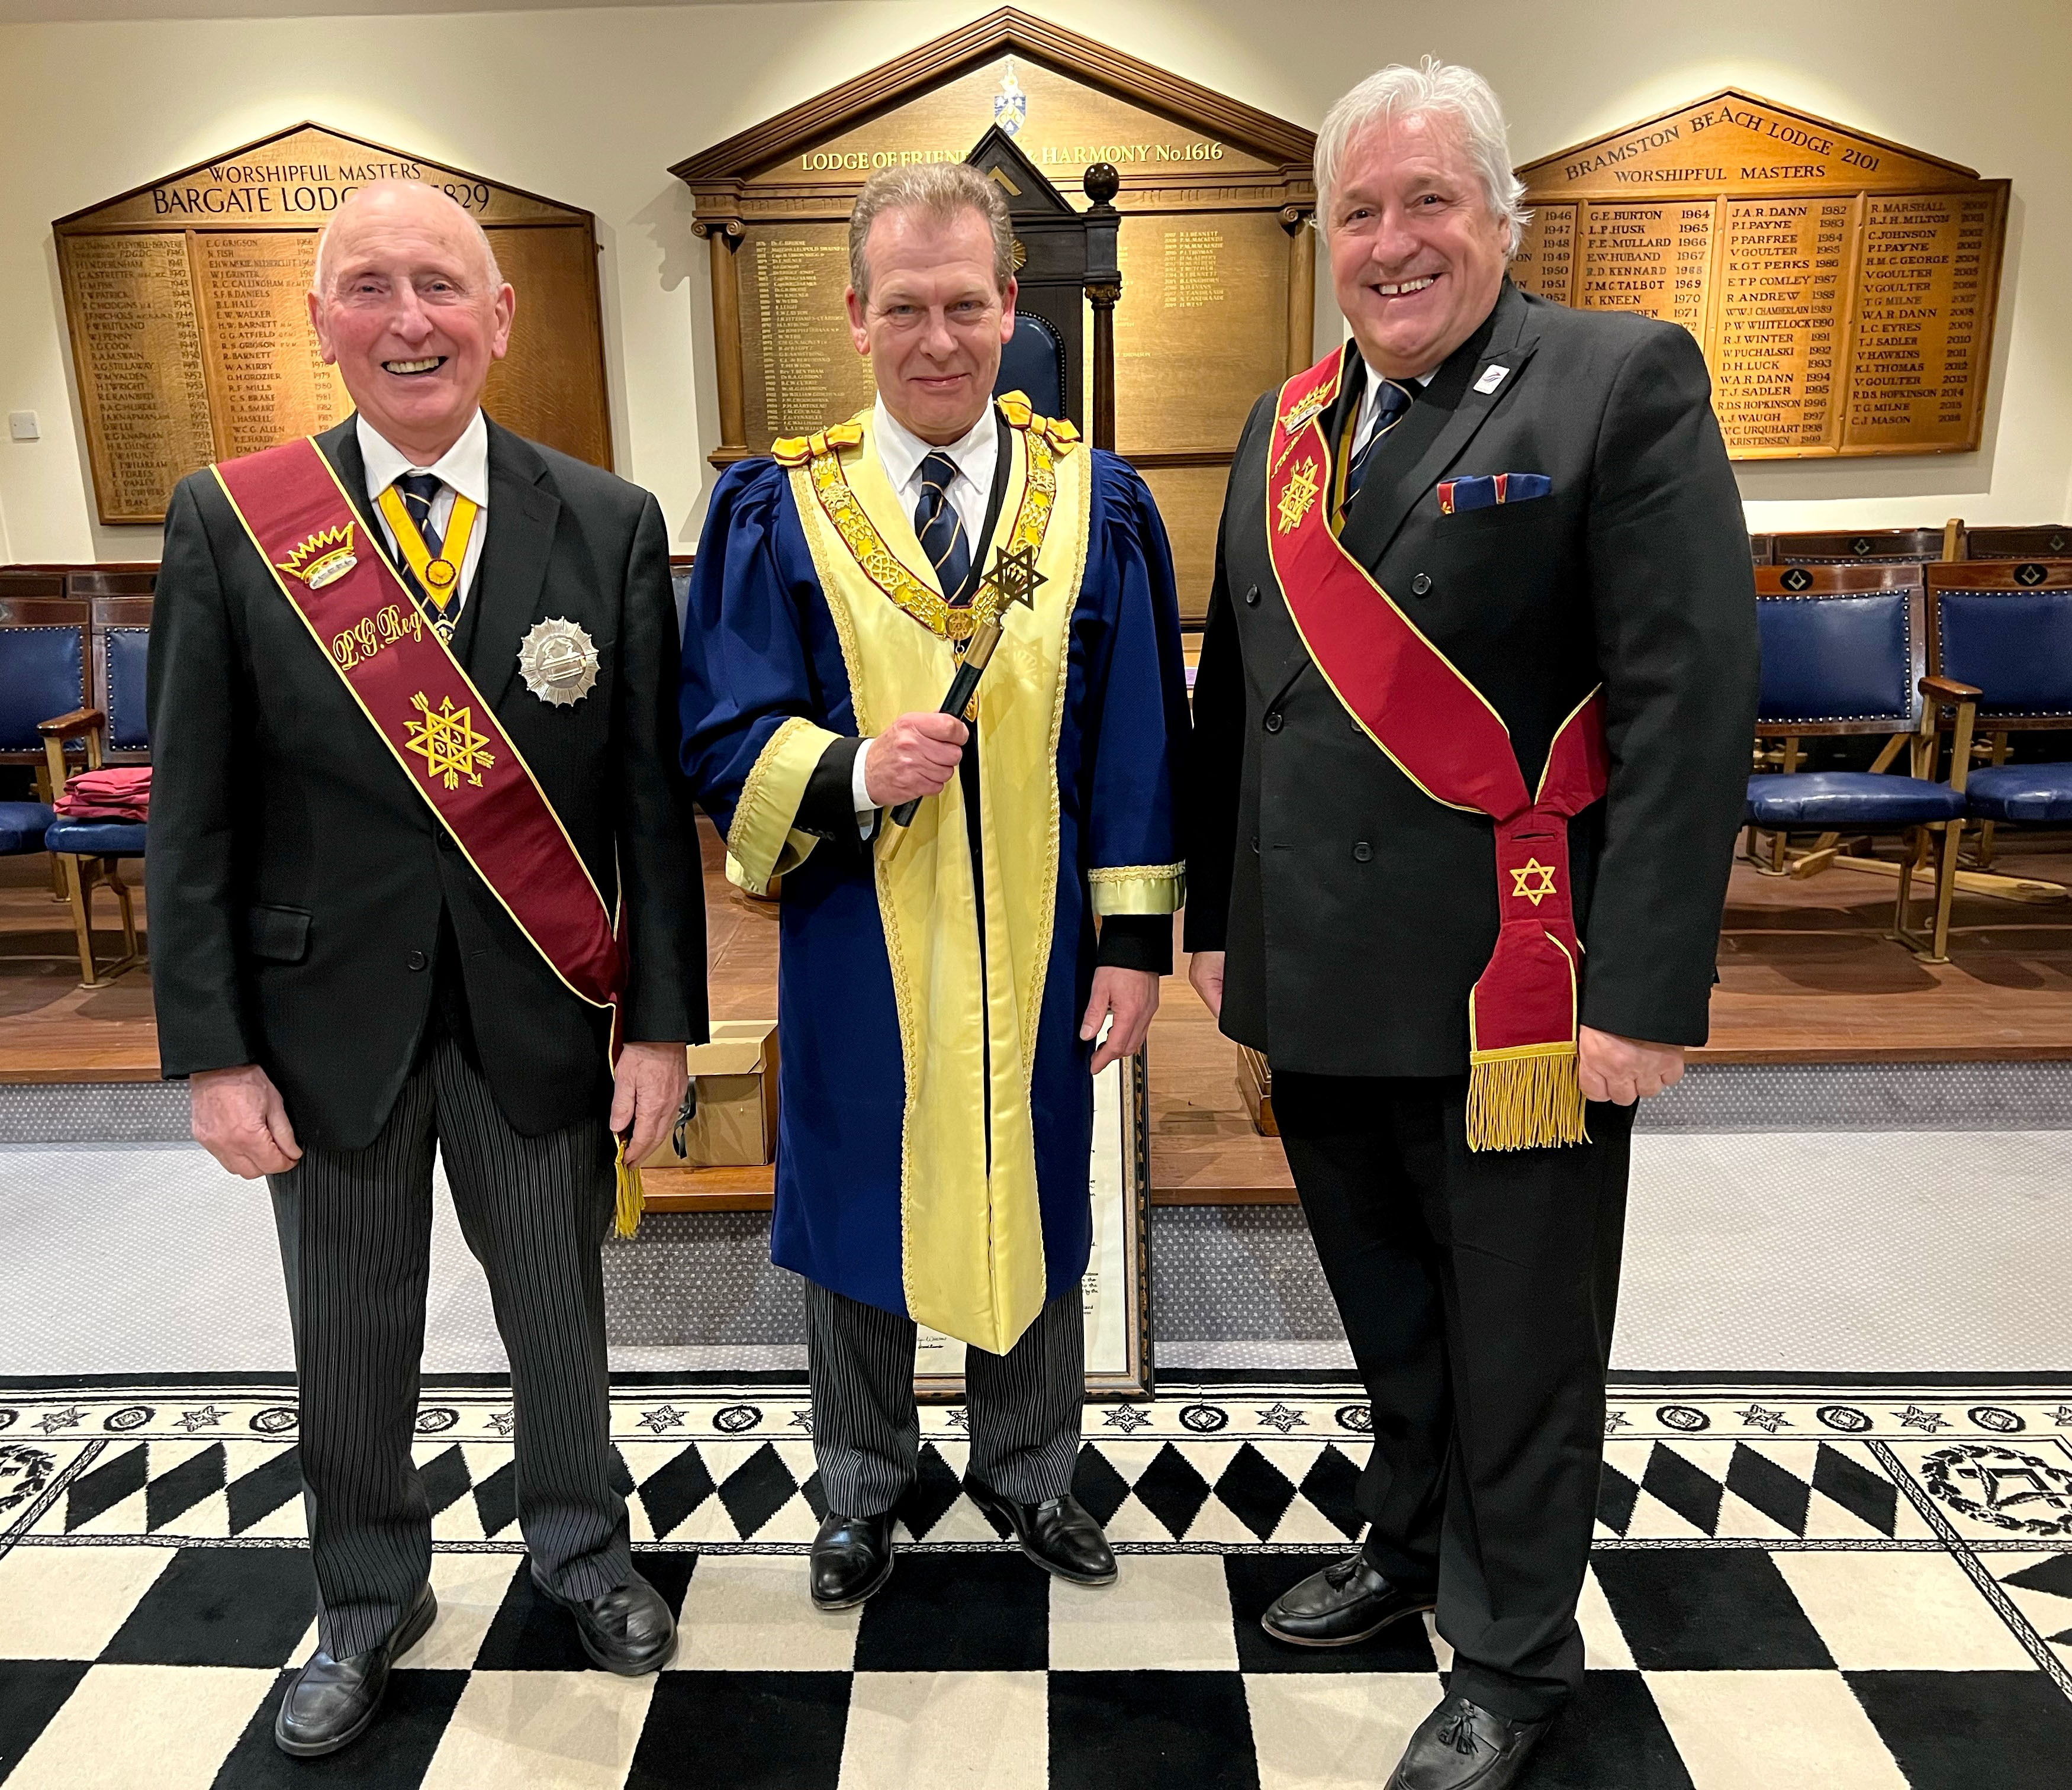 The Installation Meeting of Waverley Conclave